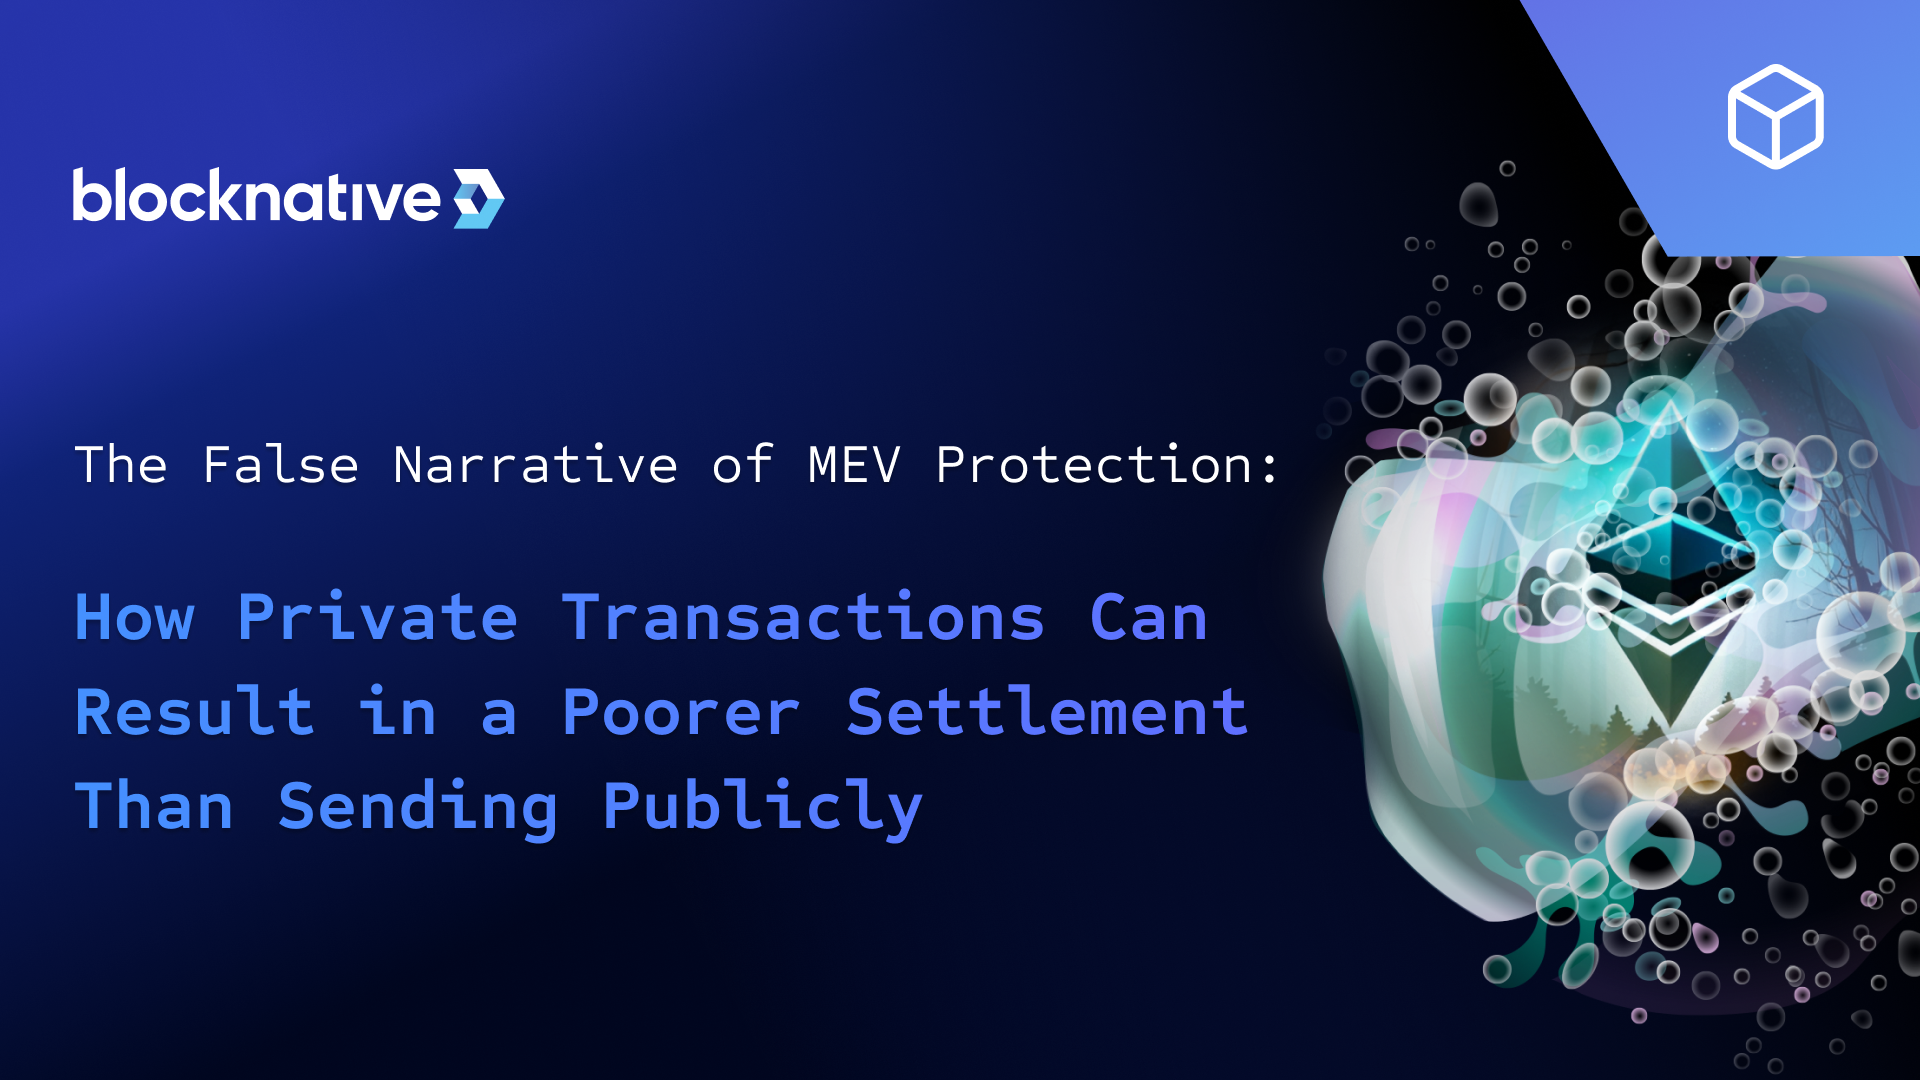 the-false-narrative-of-mev-protection:-how-private-transactions-can-result-in-a-poorer-settlement-than-sending-publicly